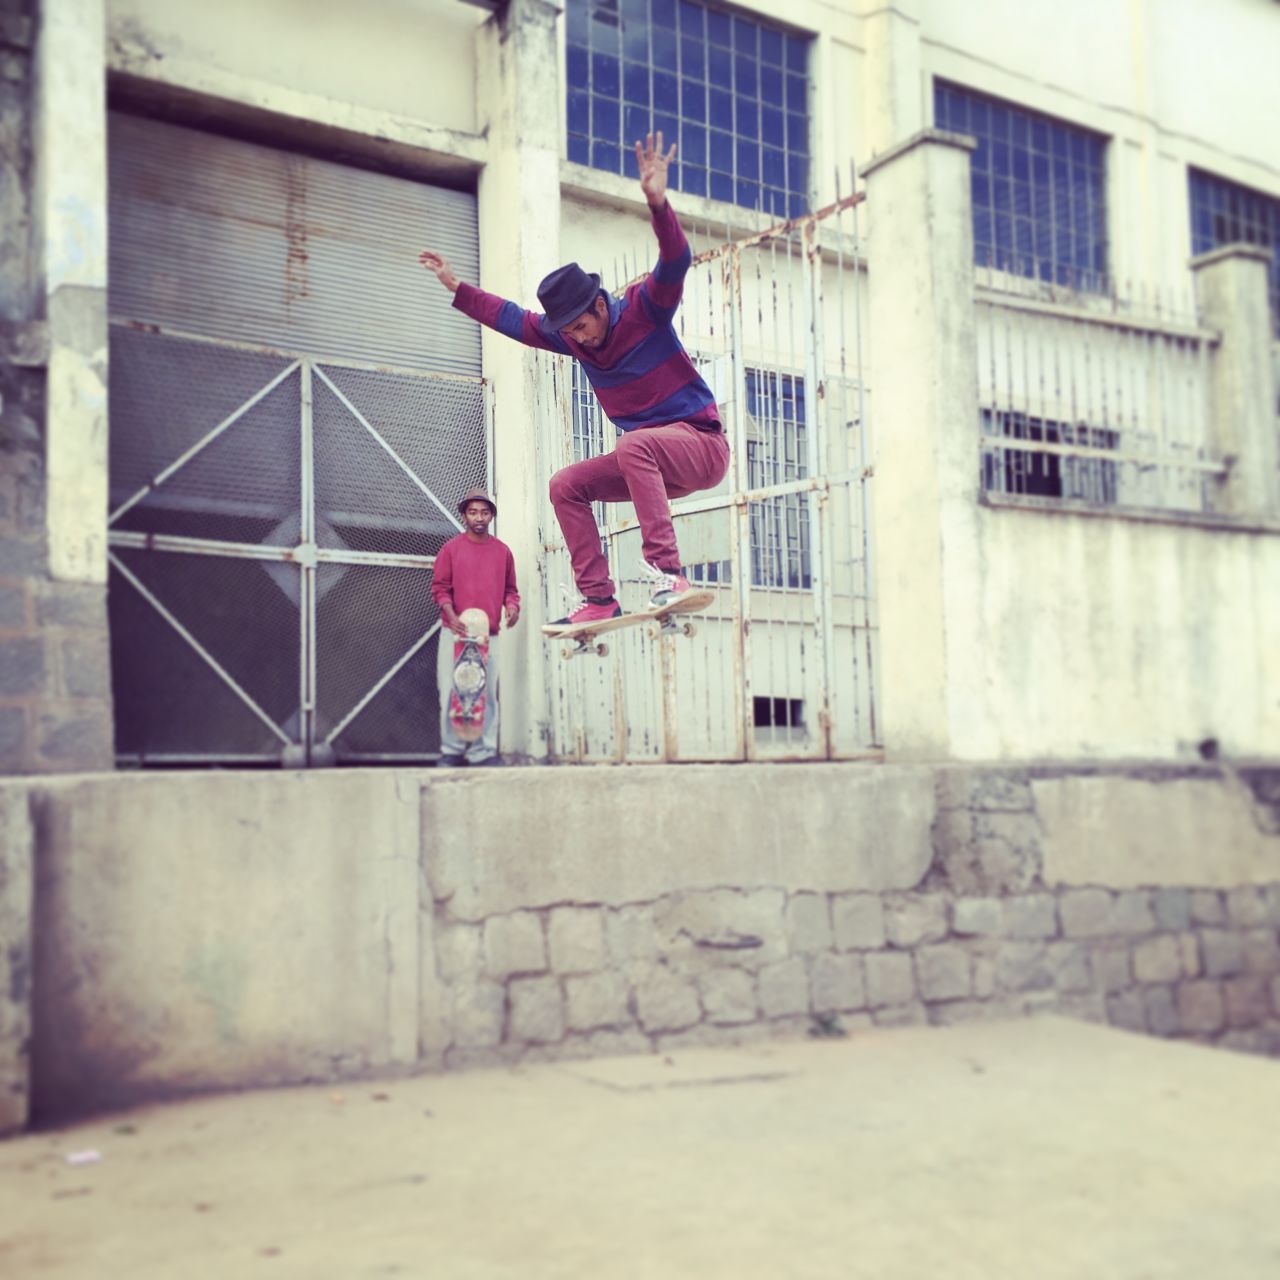 Pictured here,  Andriamasinoro in action, in Tana, Madagascar. "When we started, we were just ten guys," he says. The group now boasts around 80 skaters.